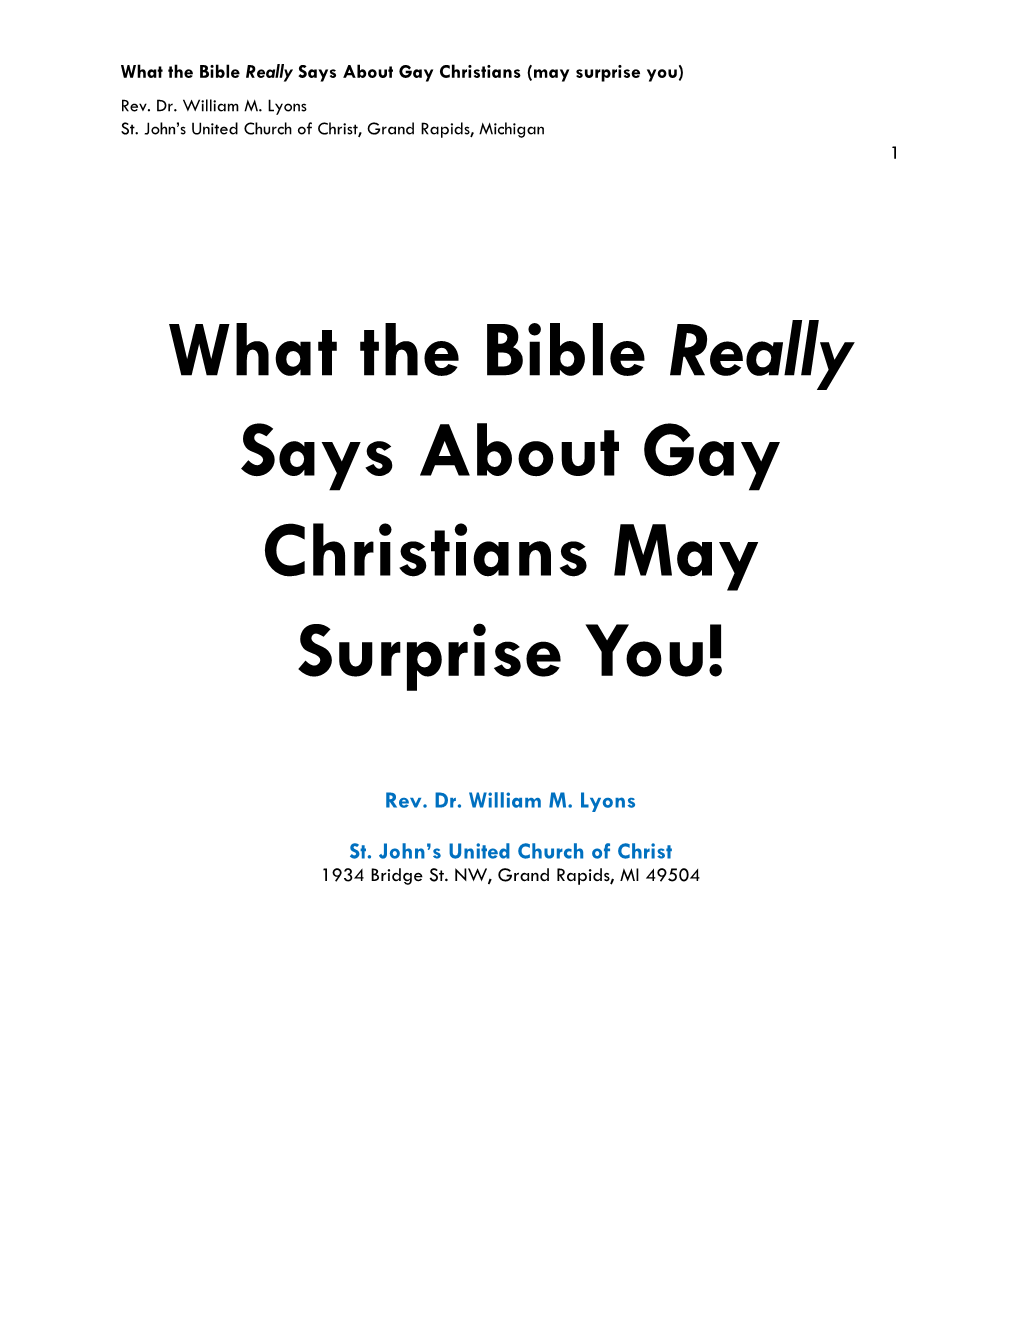 What the Bible Really Says About Gay Christians May Surprise You!